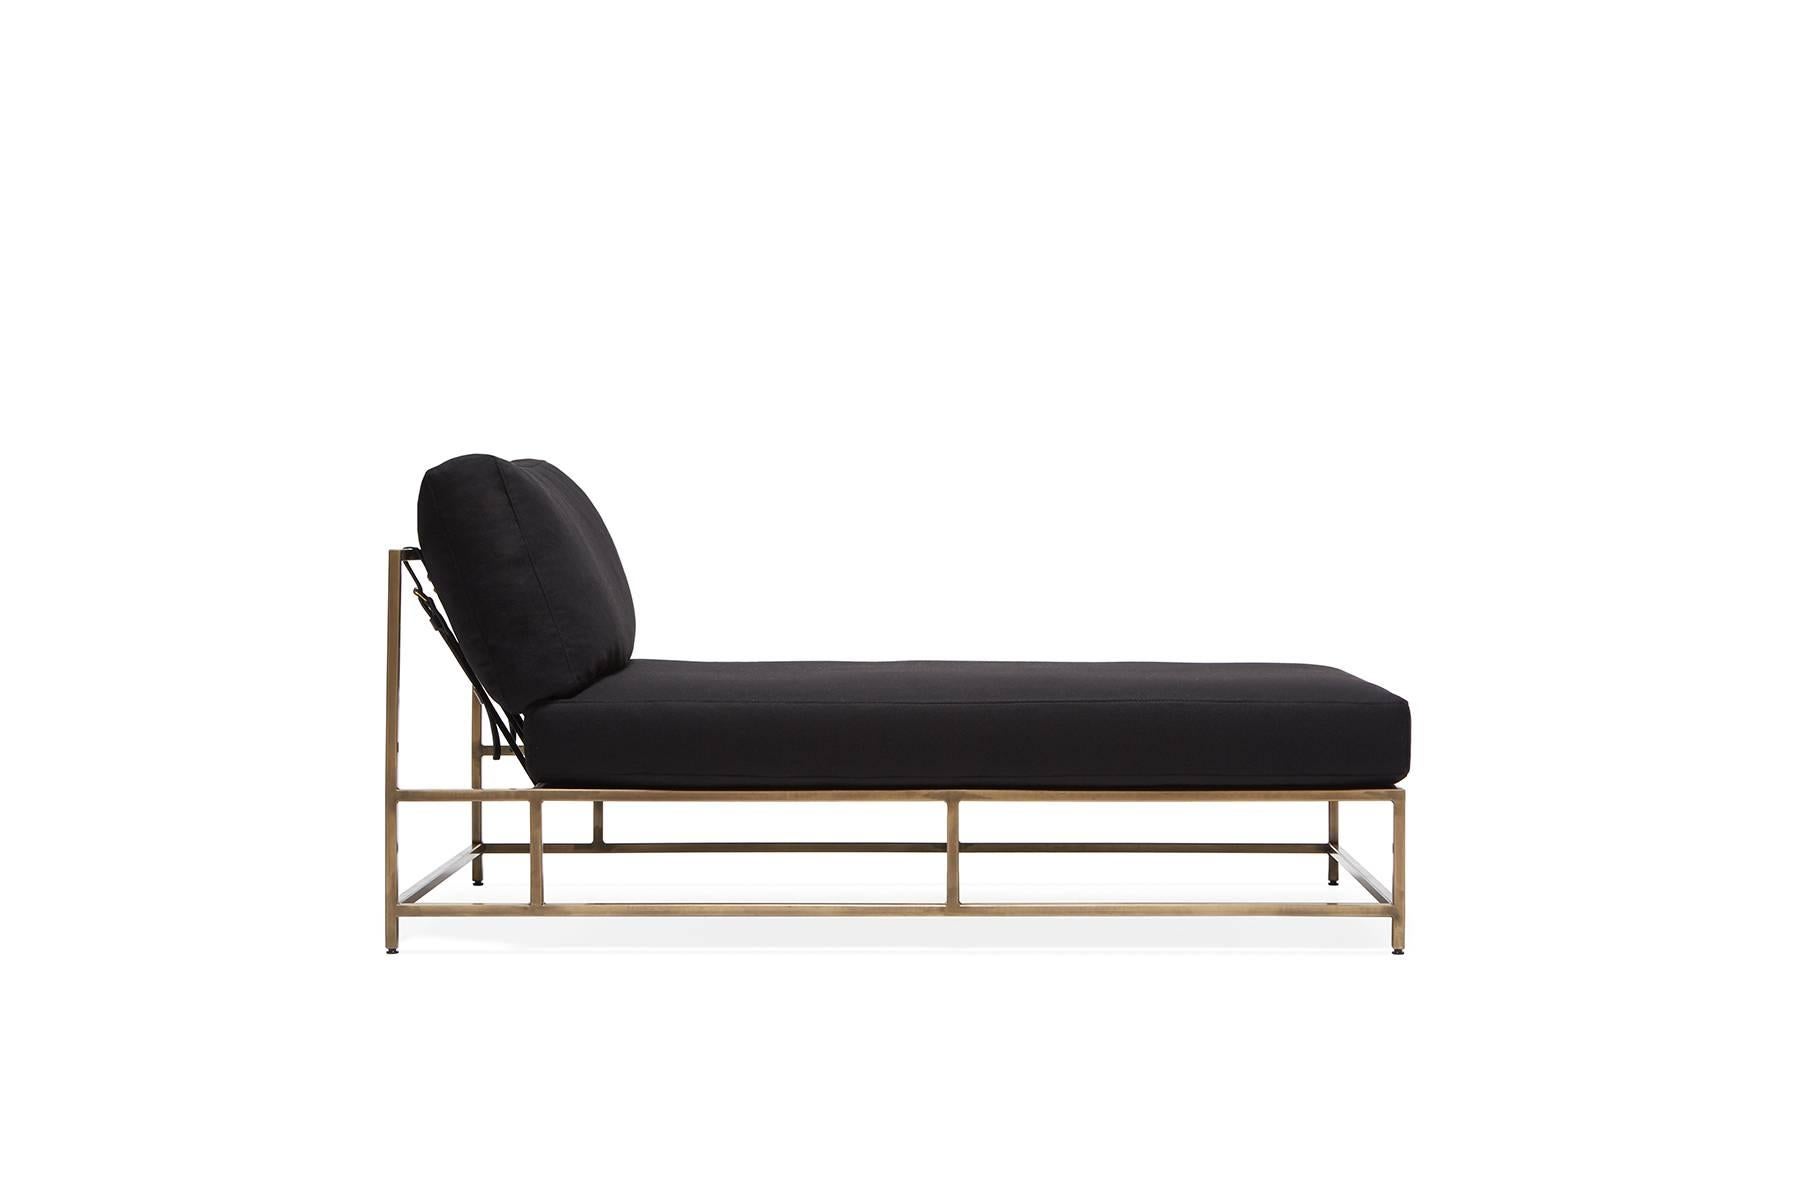 The Inheritance Chaise Lounge by Stephen Kenn is as comfortable as it is unique. The design features an exposed construction composed of three elements - a steel frame, plush upholstery, and supportive belts. The deep seating area is perfect for a